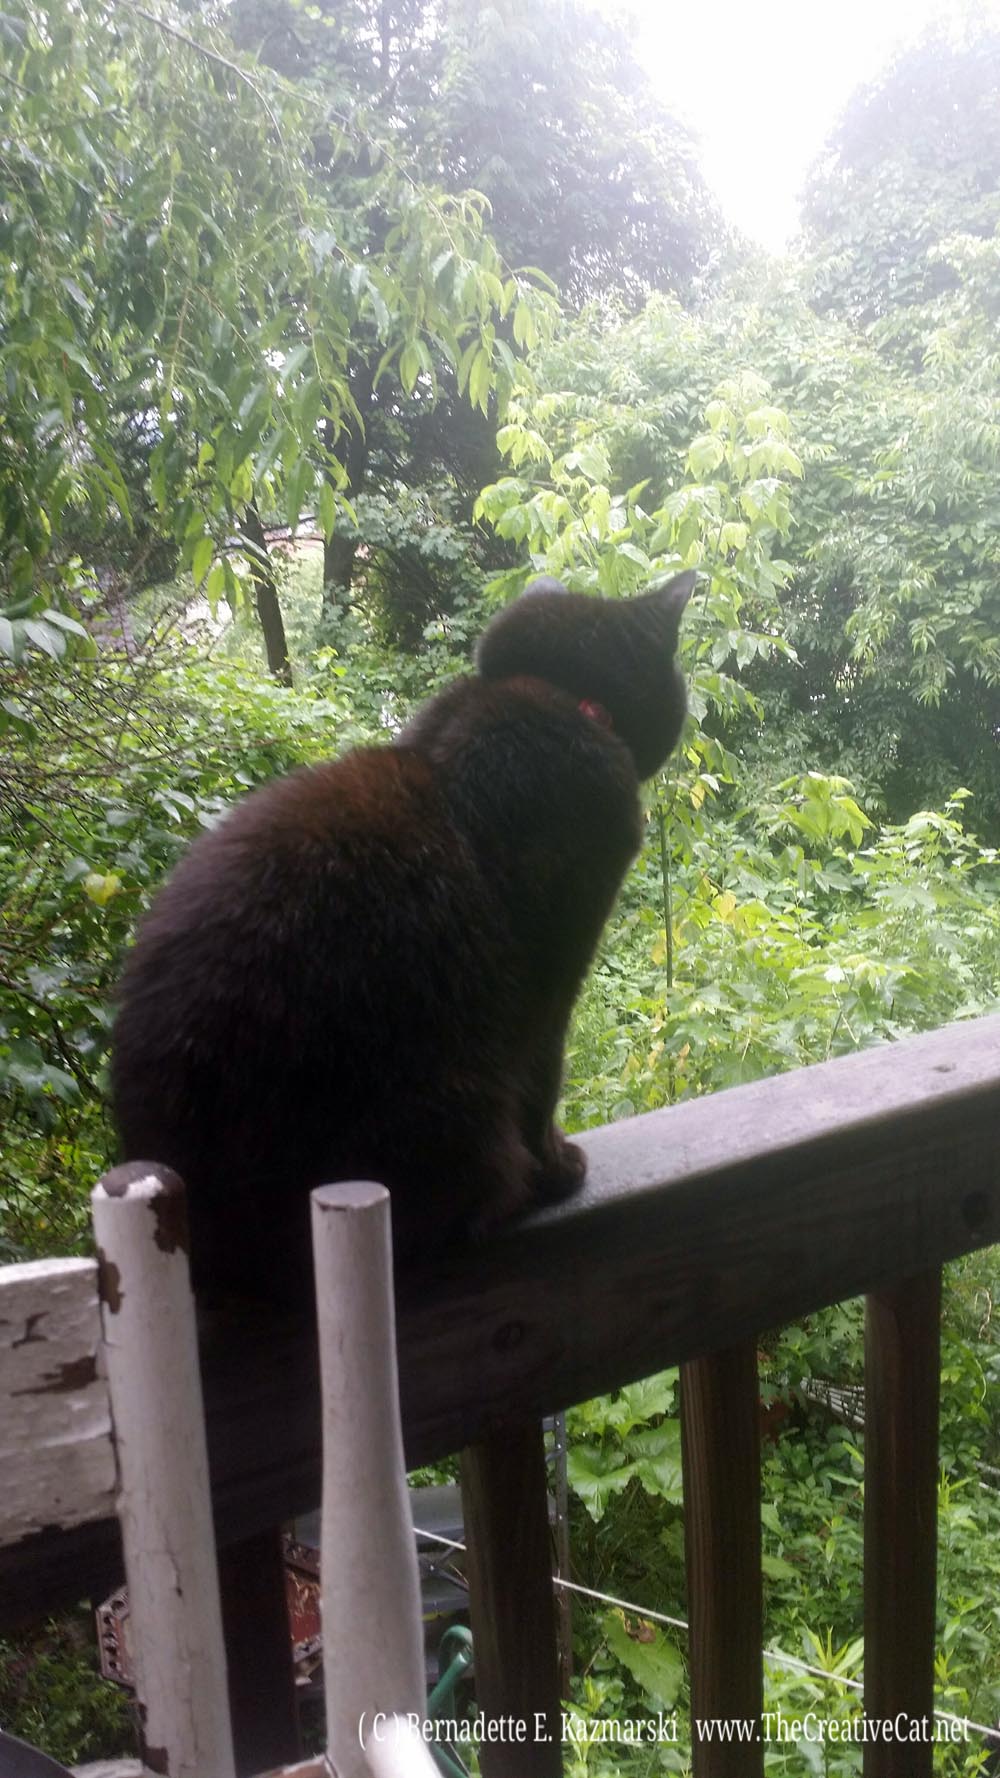 Mimi looking out on the misty morning.